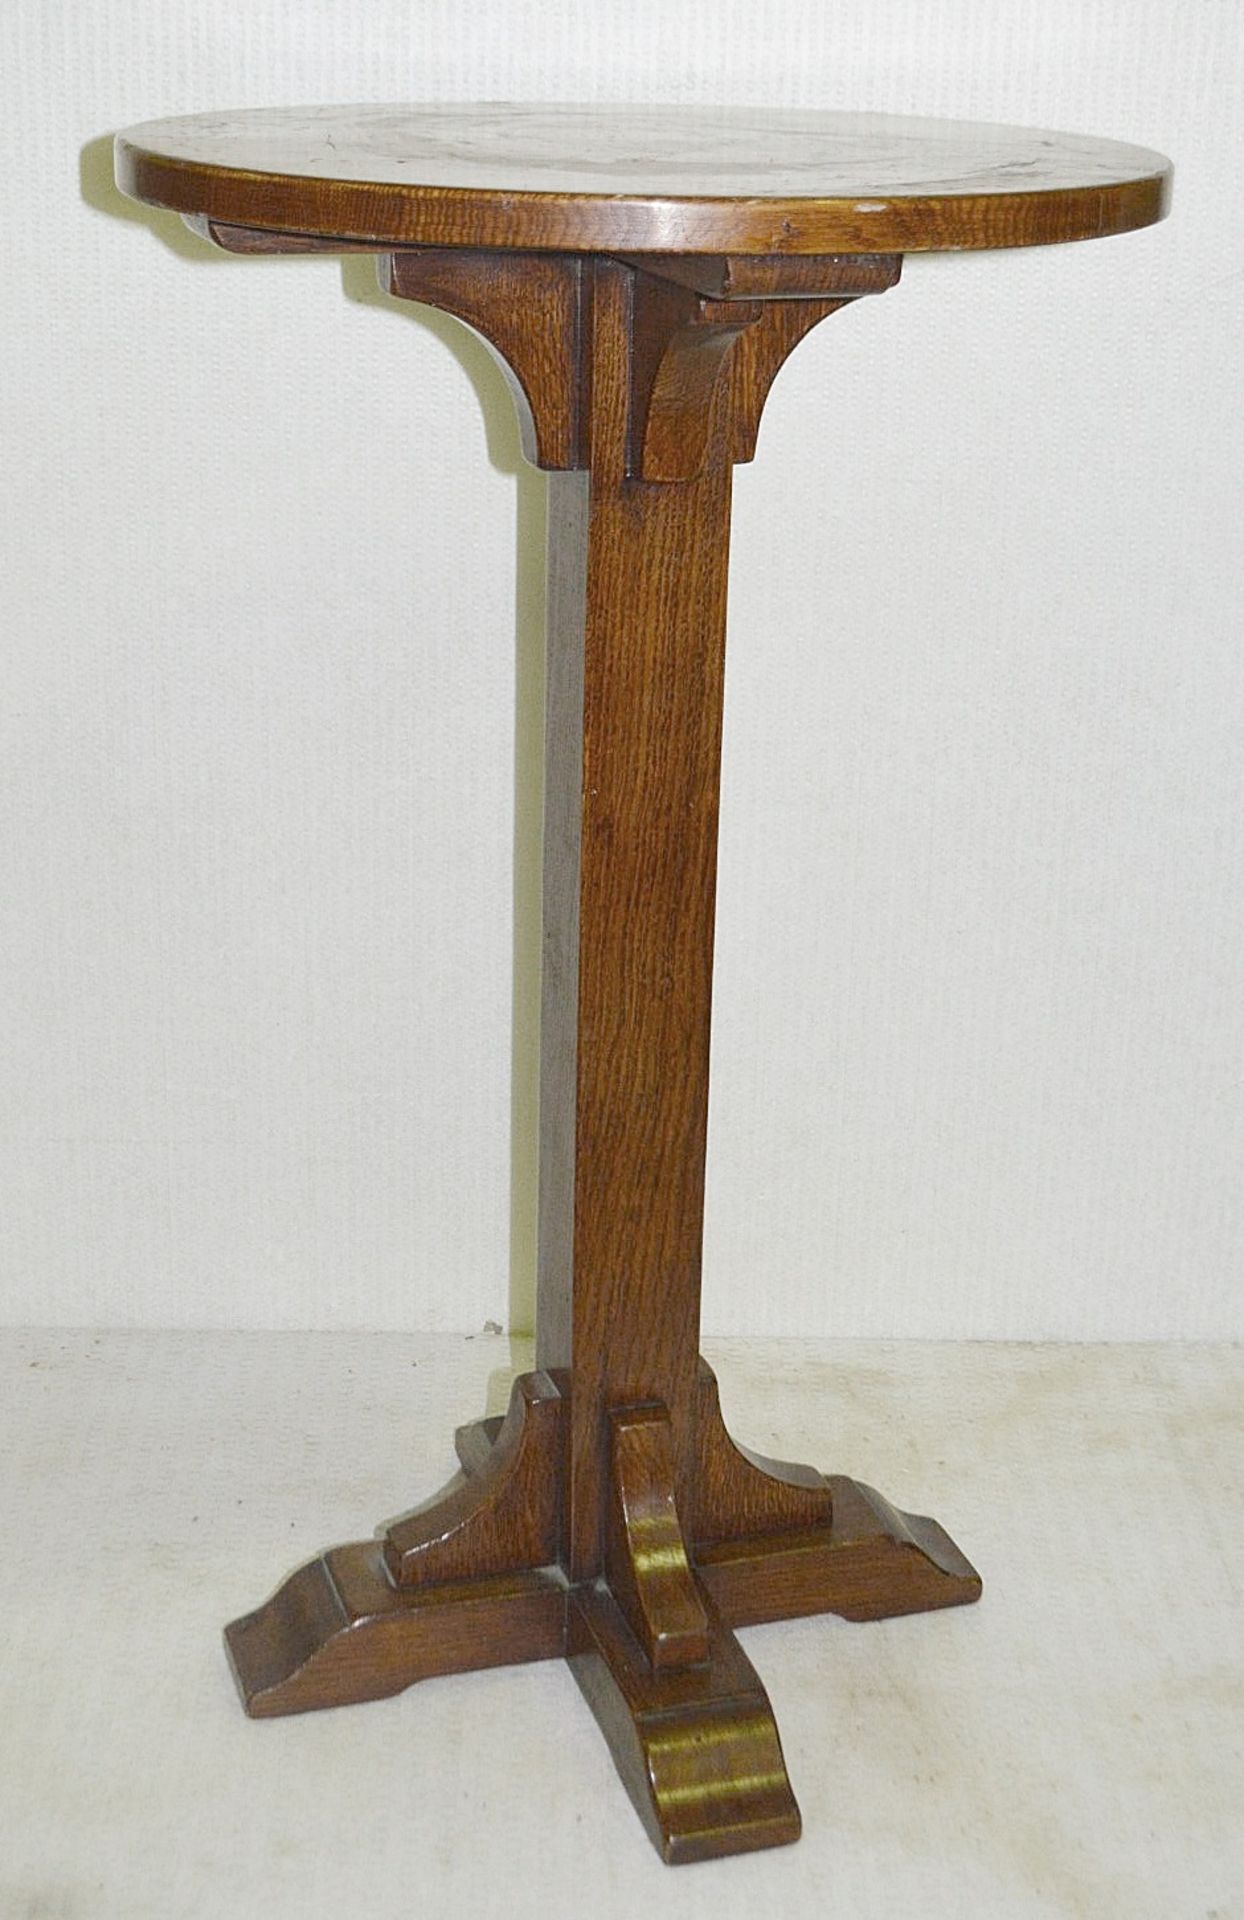 1 x Vintage Solid Wood Plant Stand / Side Table - Ex-Display - Dimensions (Approx): H80cm / ø48cm - Image 2 of 5